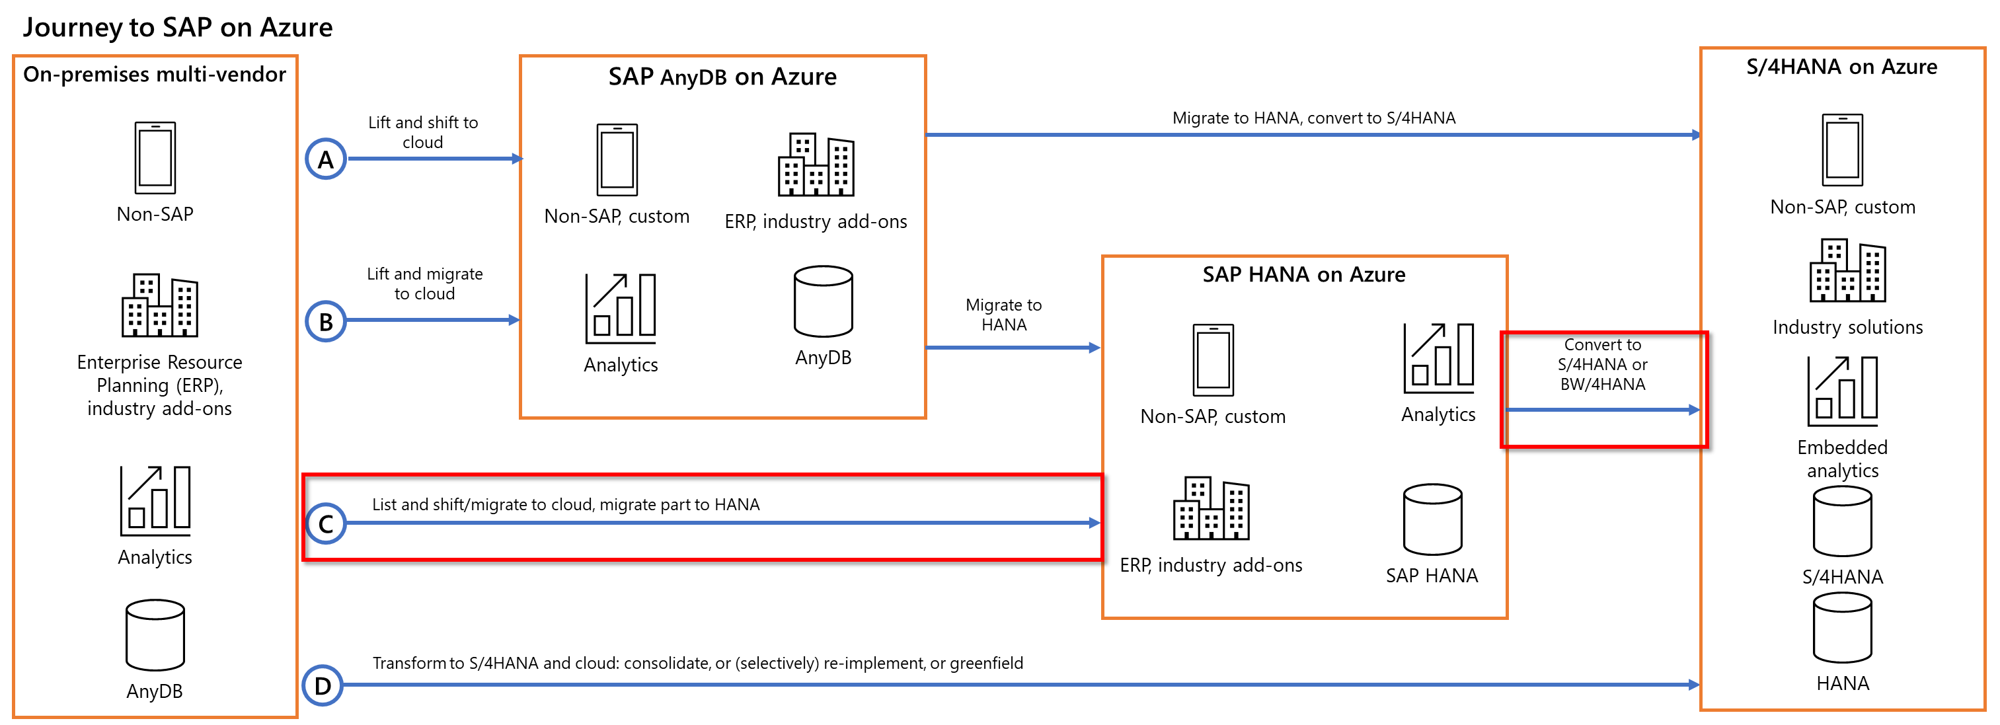 Diagram of the journey to Azure for S A P workloads.